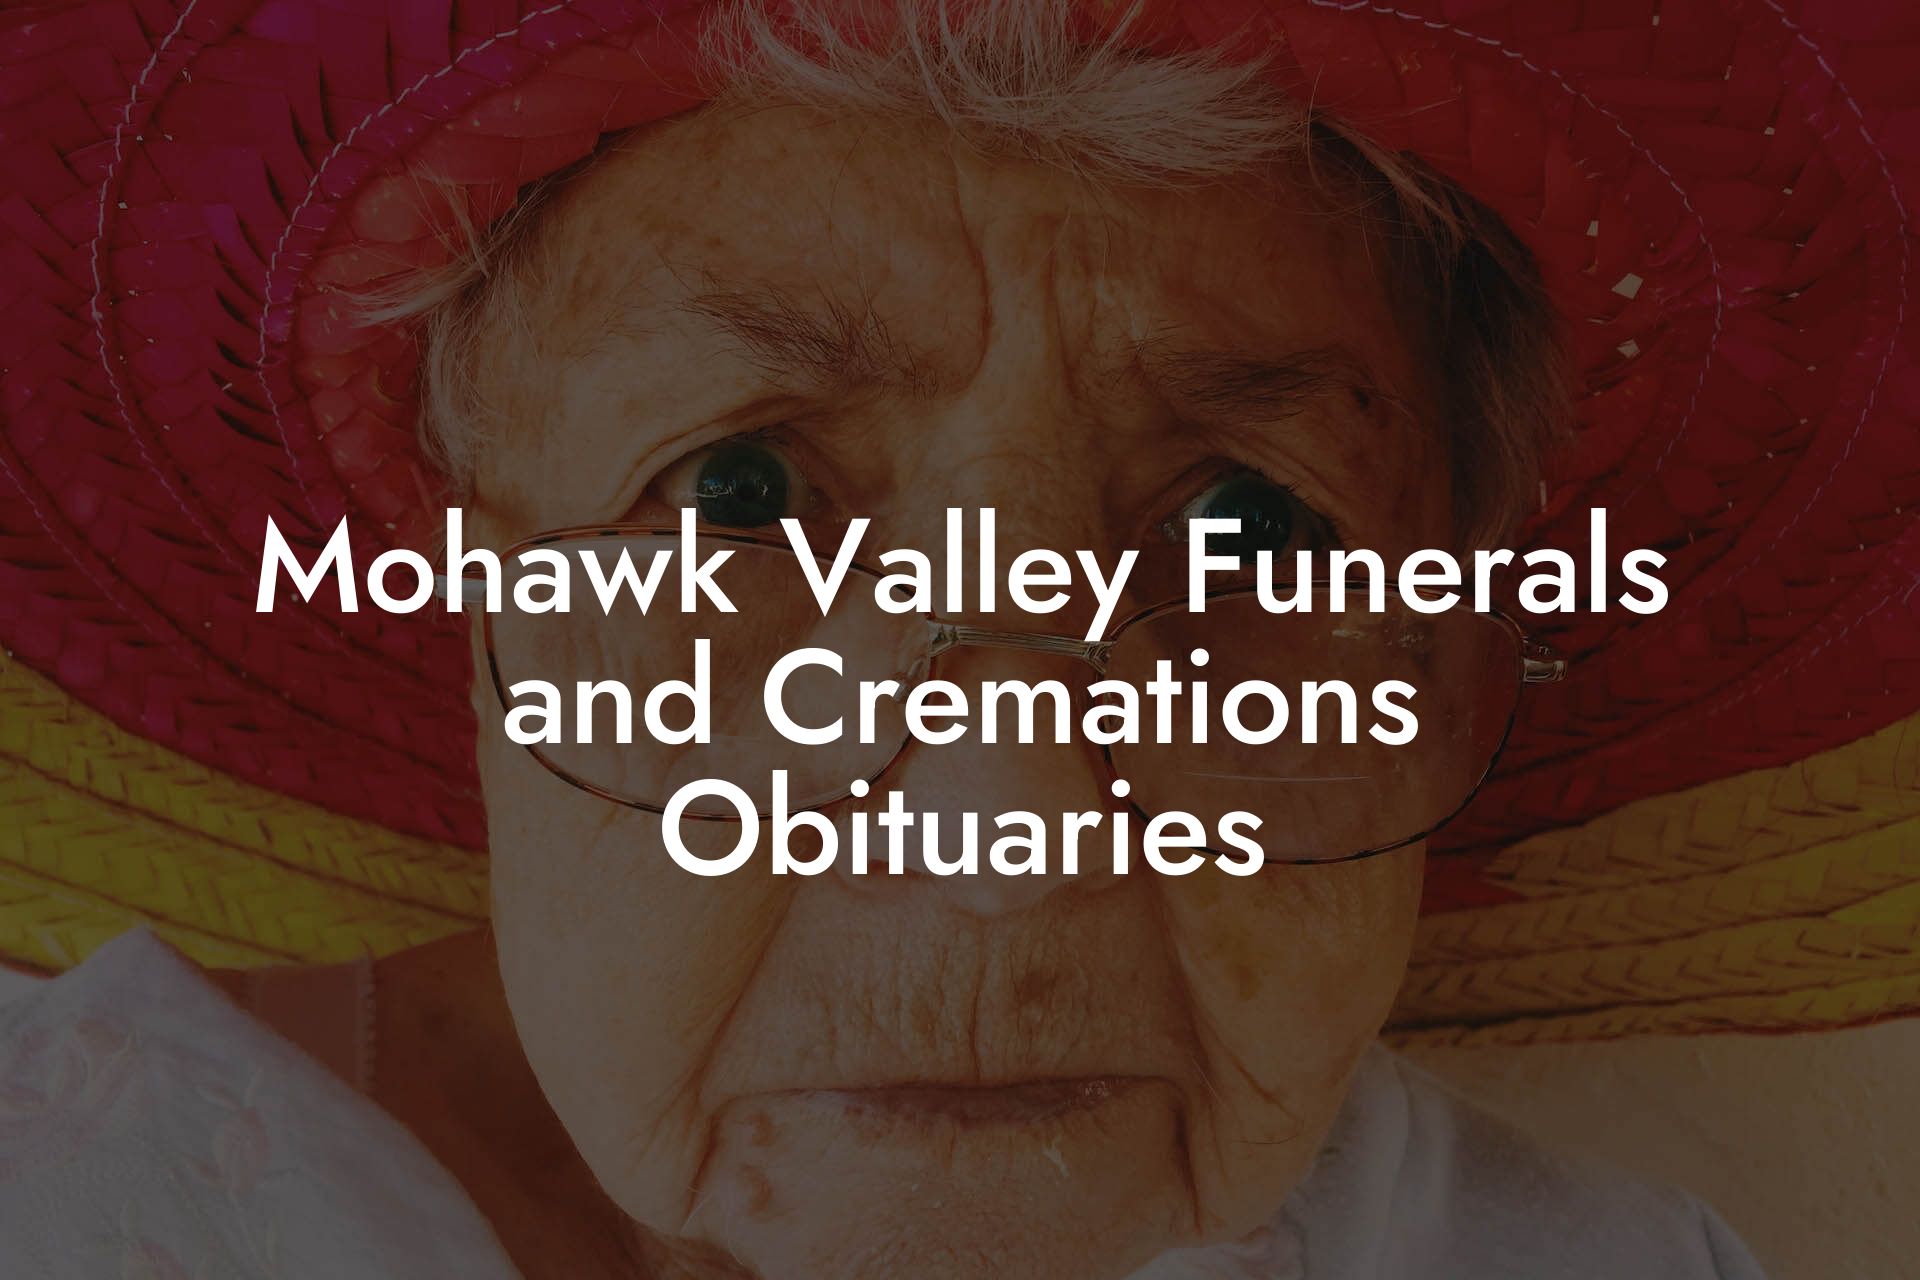 Mohawk Valley Funerals and Cremations Obituaries